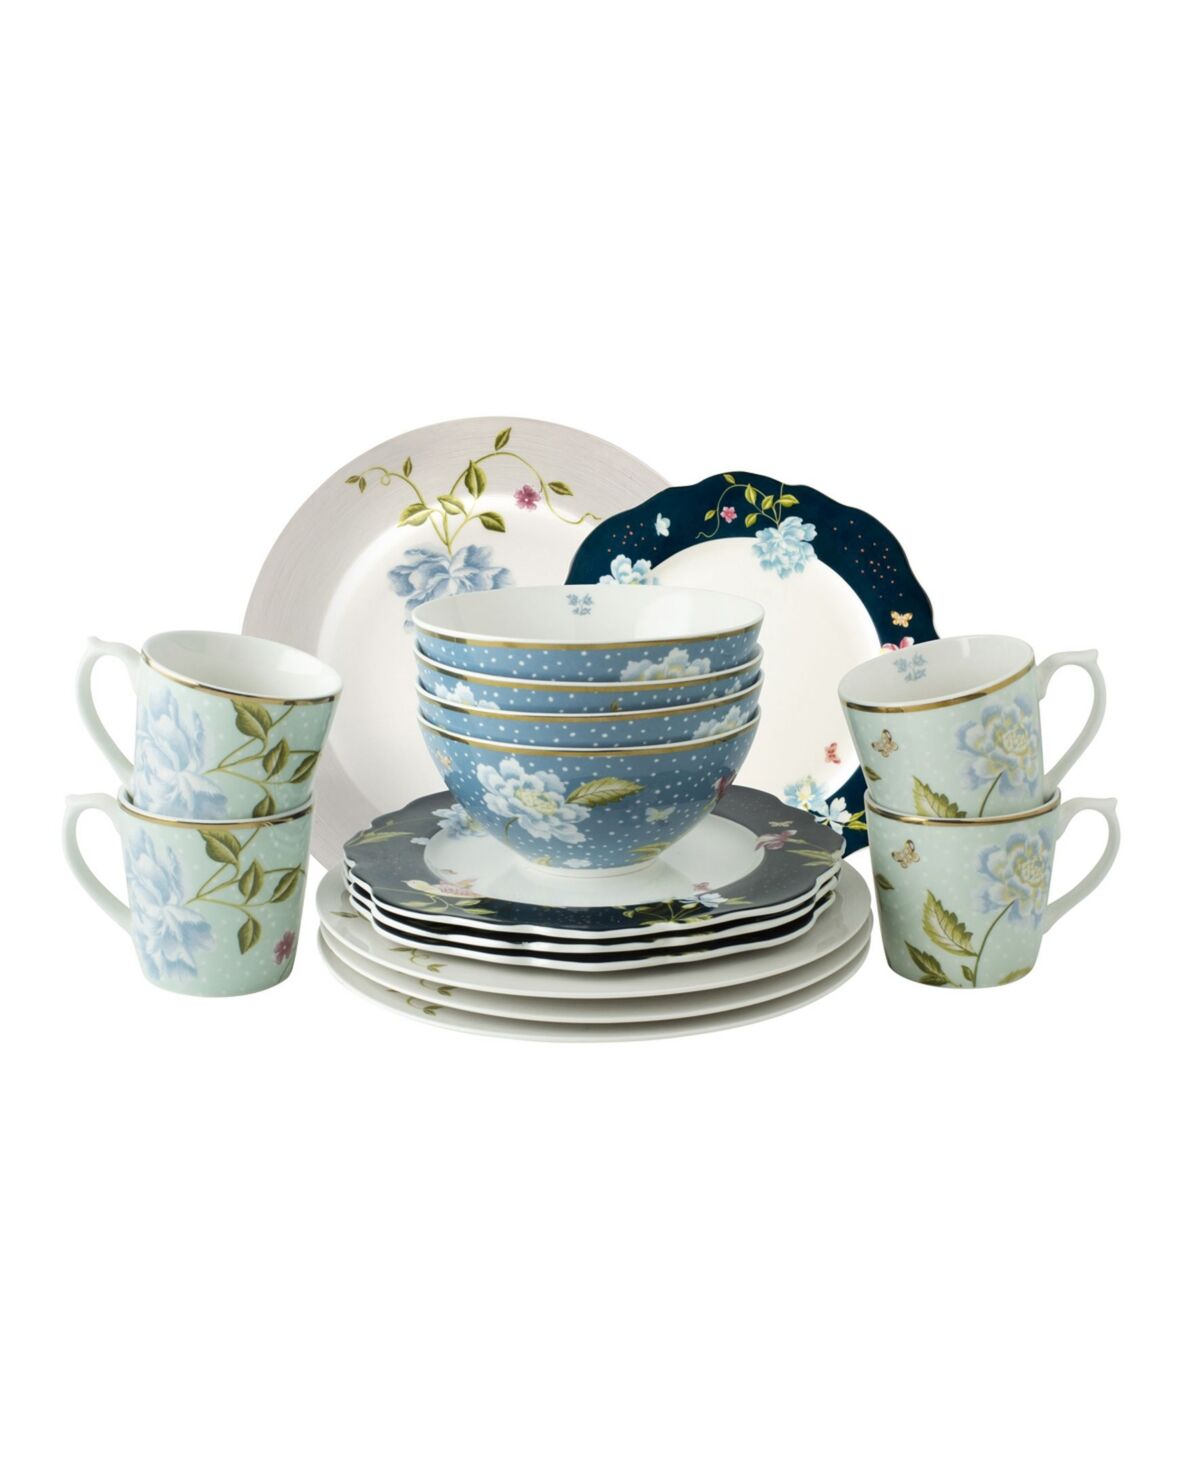 Laura Ashley Heritage Collectables Dinner Set in Gift Box, 16 Pieces - White with Different Colors